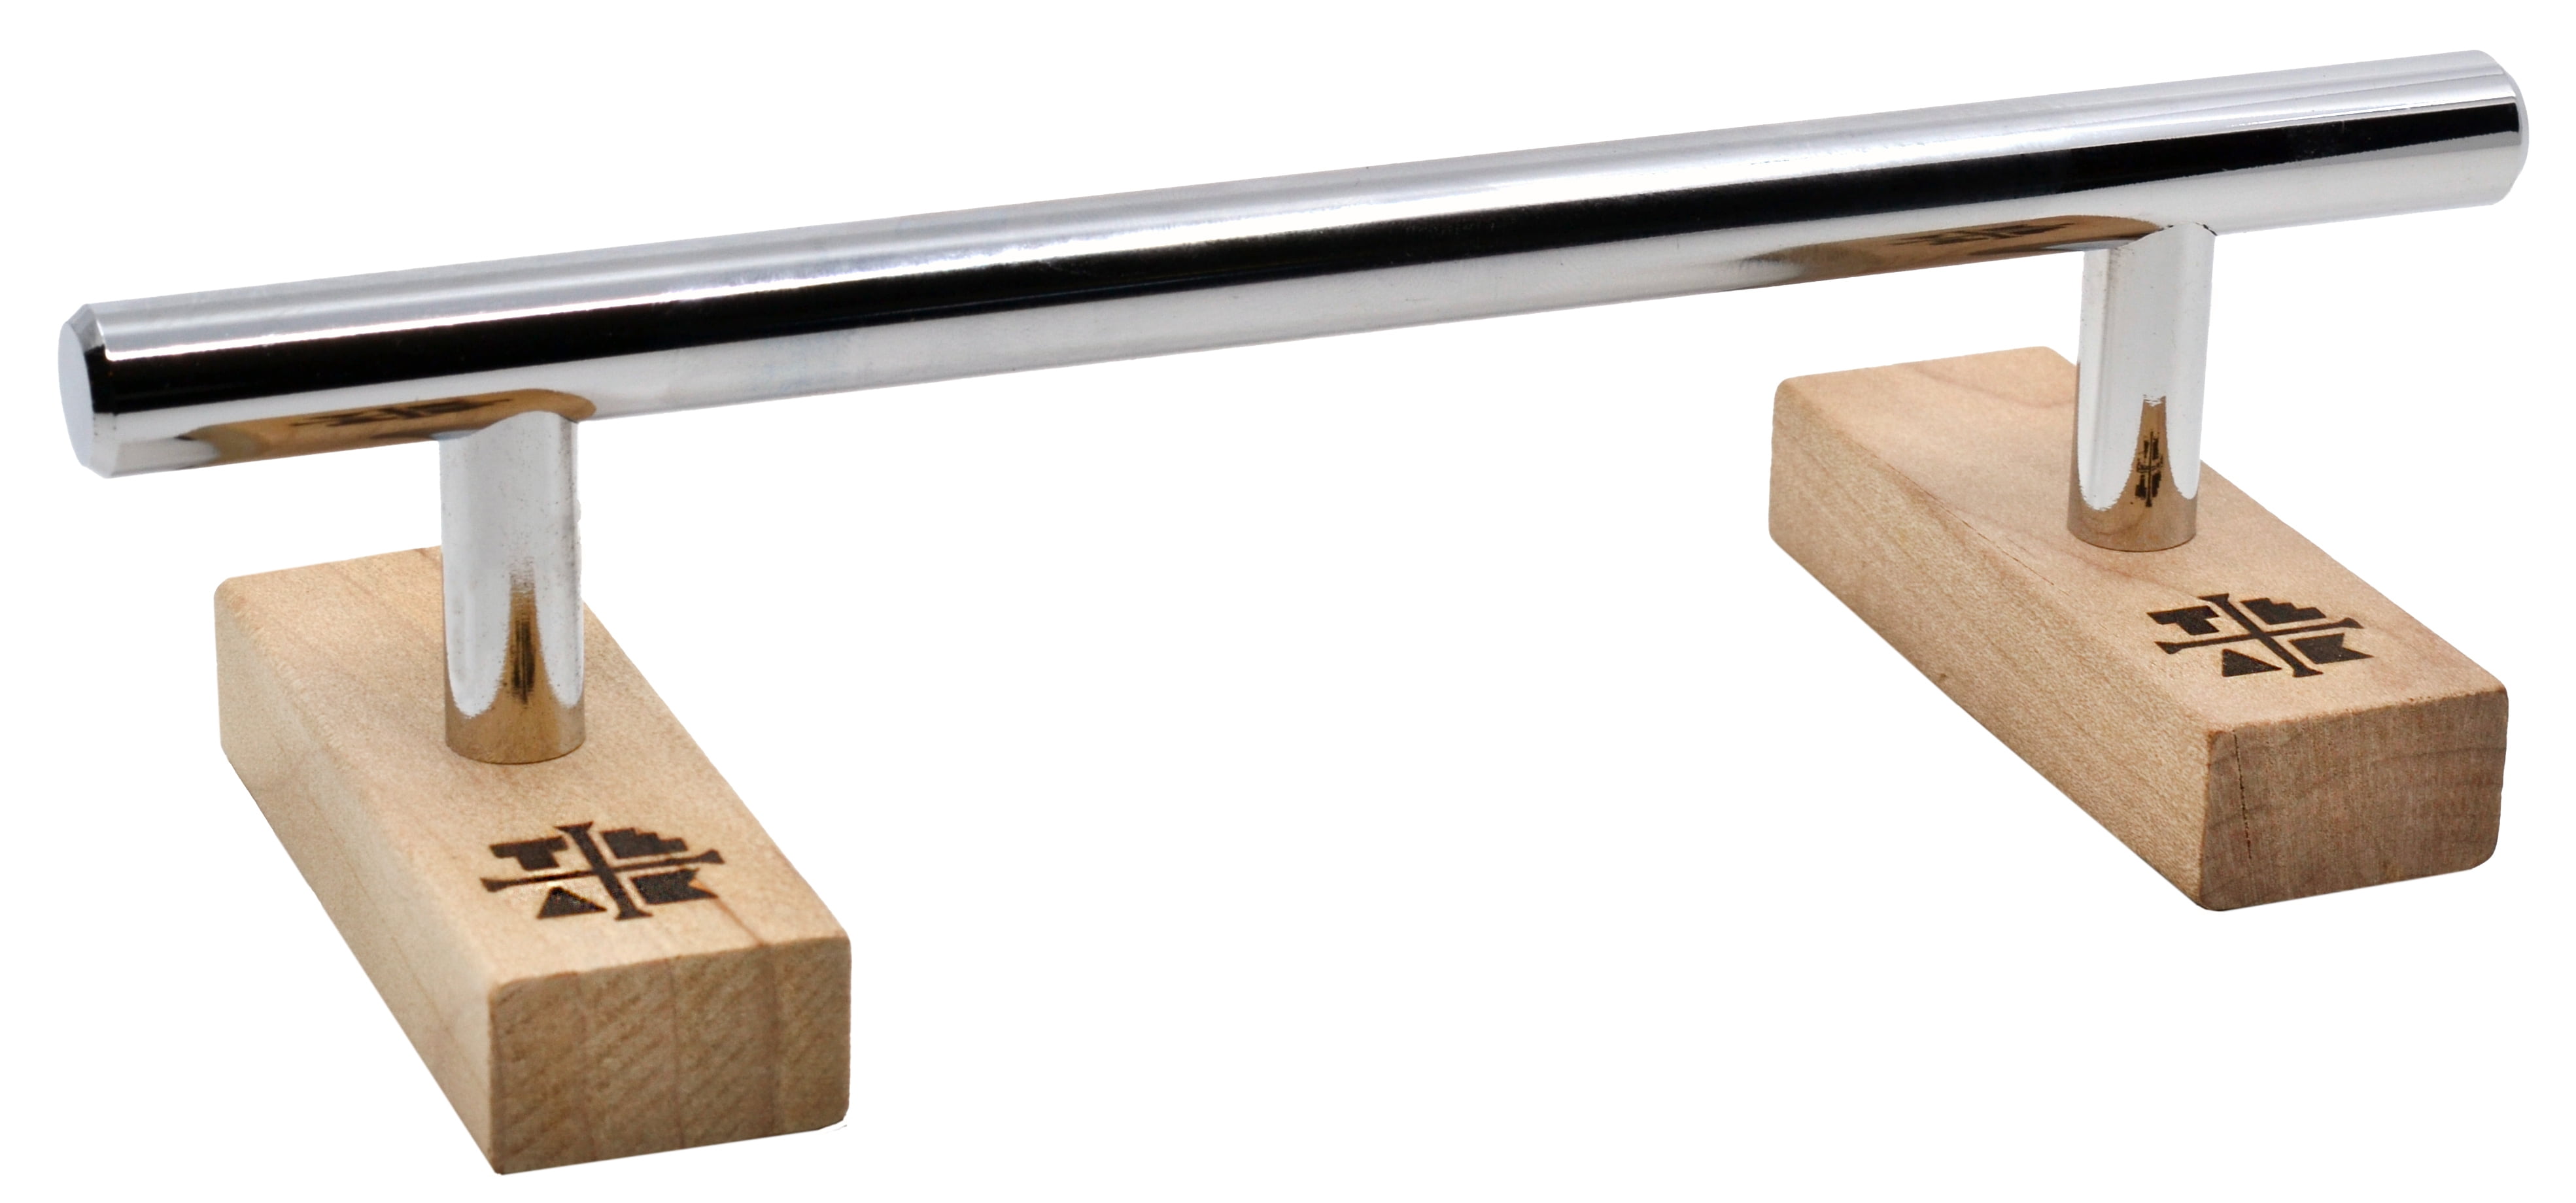 1.75 Tall Silver Colorway 10 Long Teak Tuning Round Fingerboard Rail Prolific Series Standard Edition 